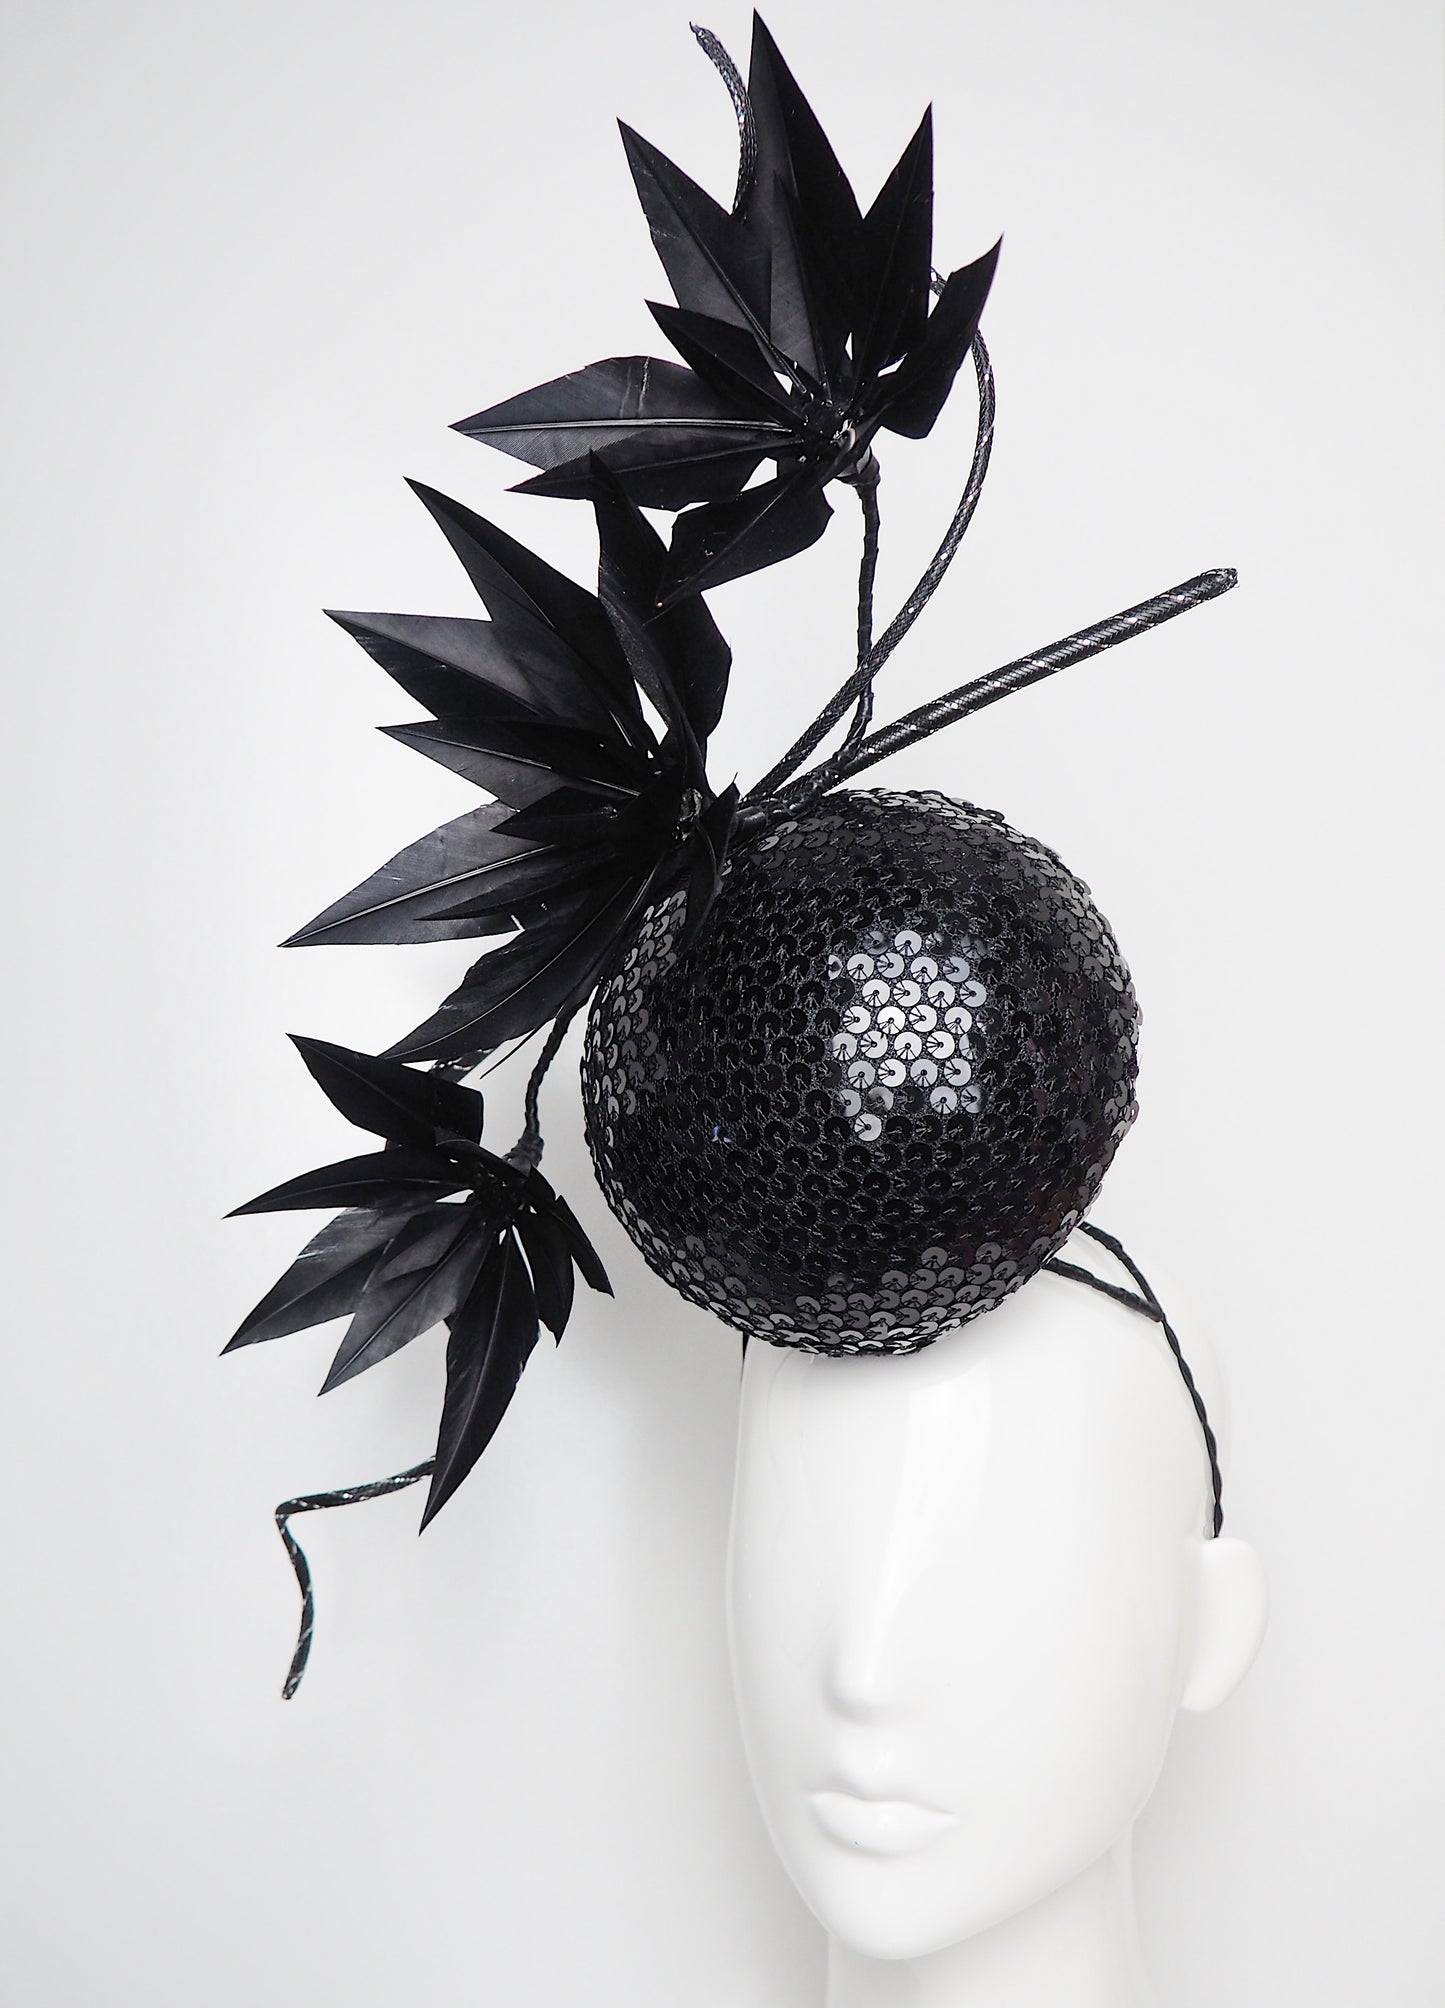 Disco Nior - Sequin percher sphere with black feather flowers and metallic swirl Quills.